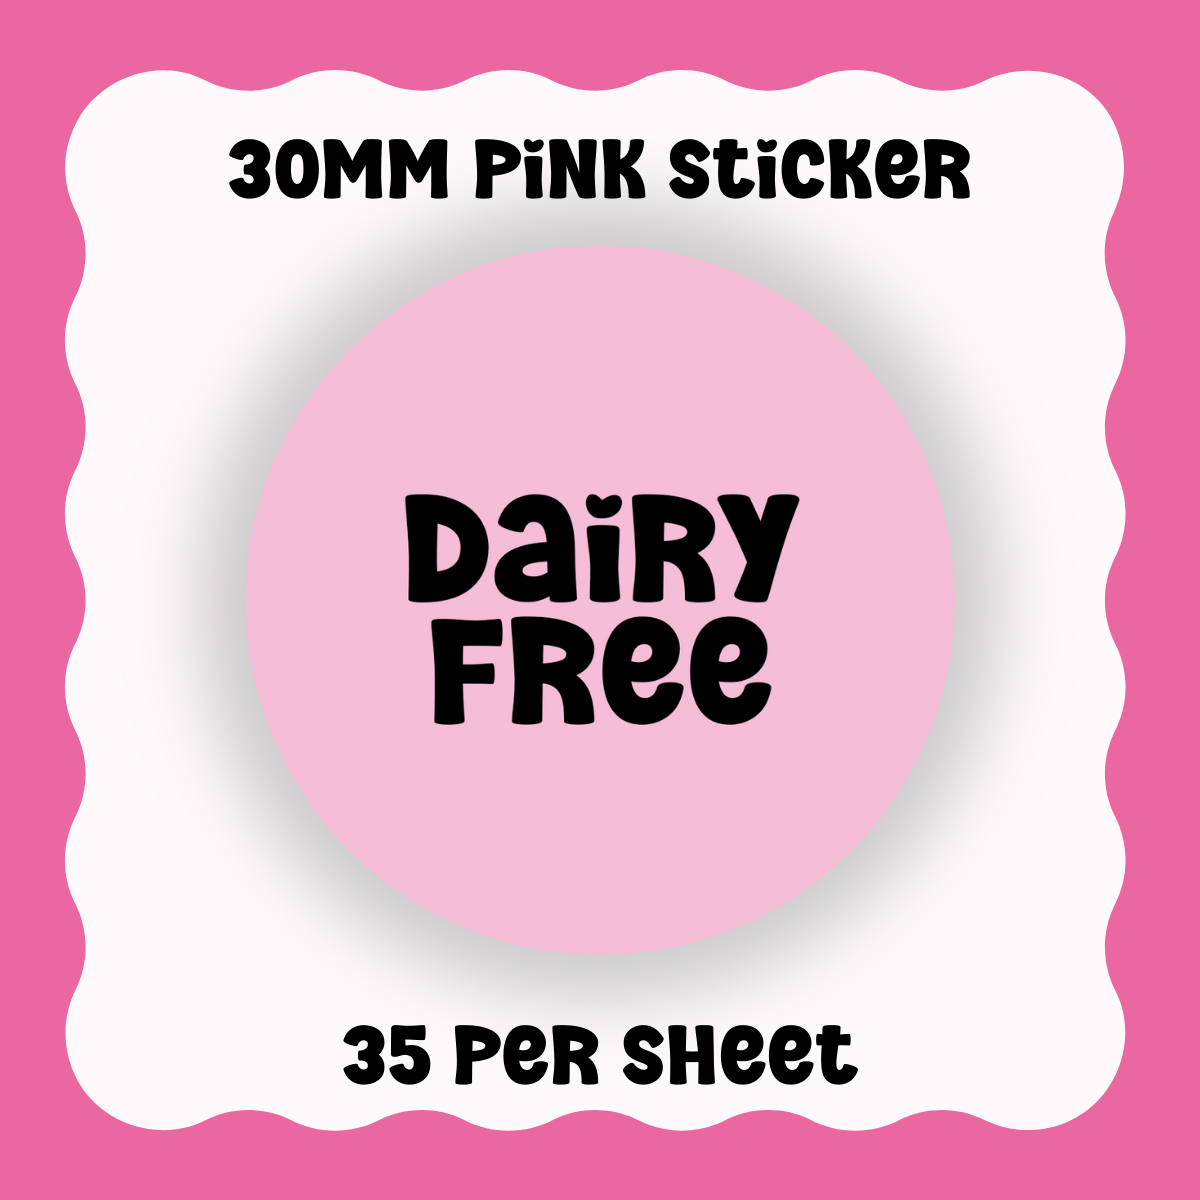 Dairy Free Stickers - Text only